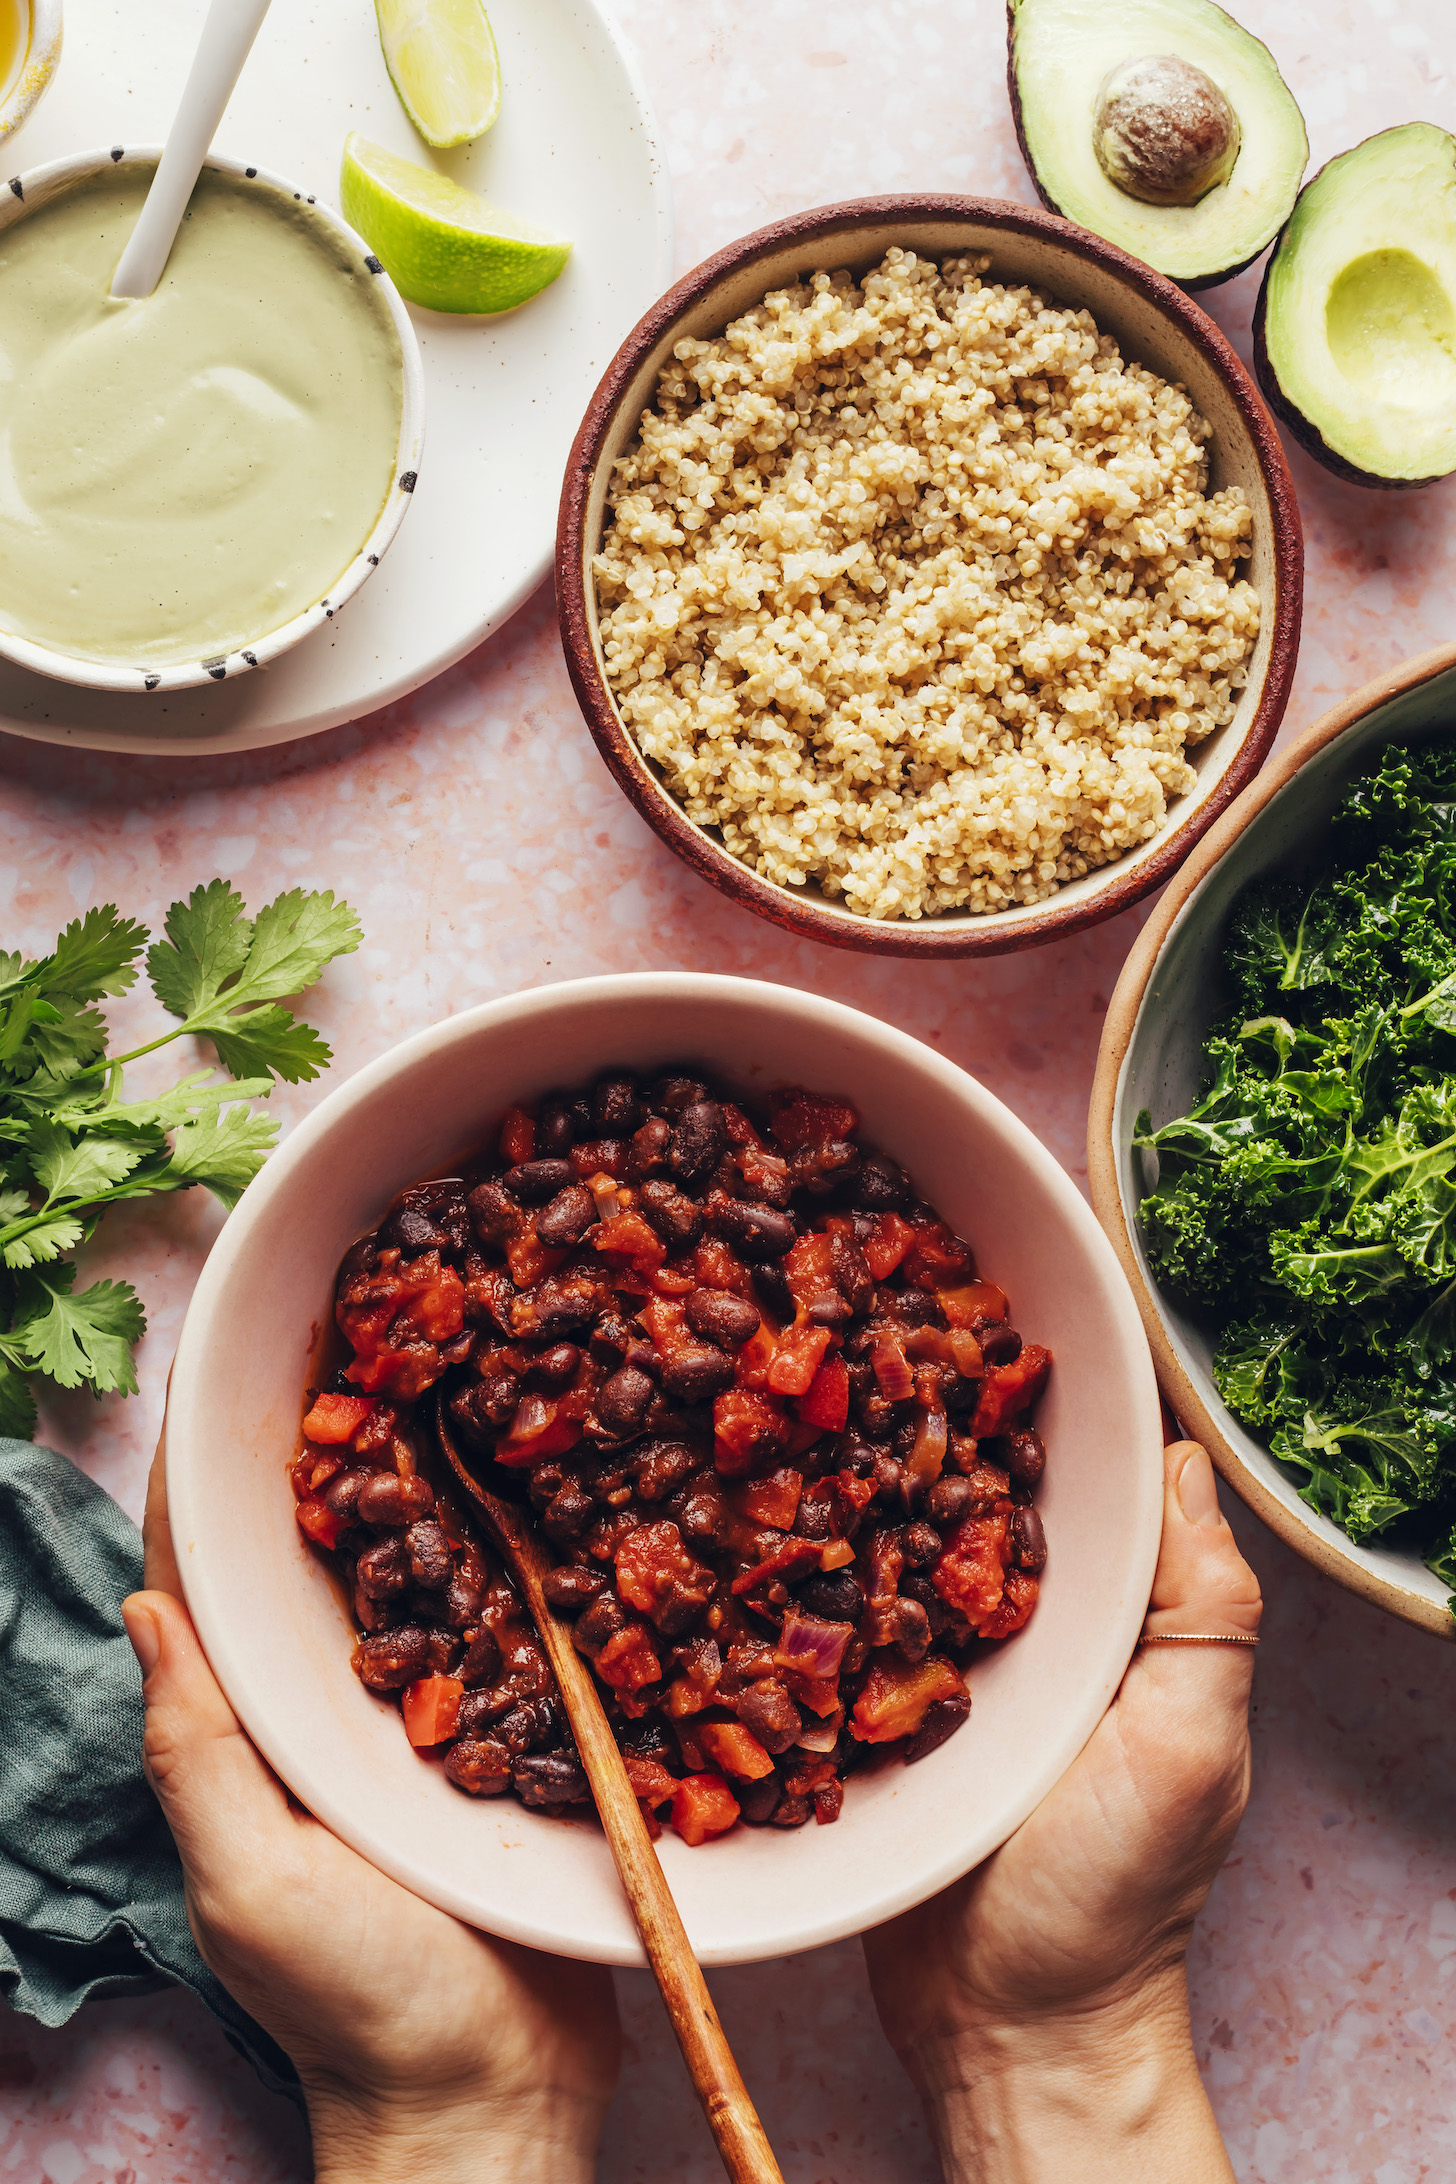 Hands around a bowl of chili next to other ingredients to make vegan chili bowls